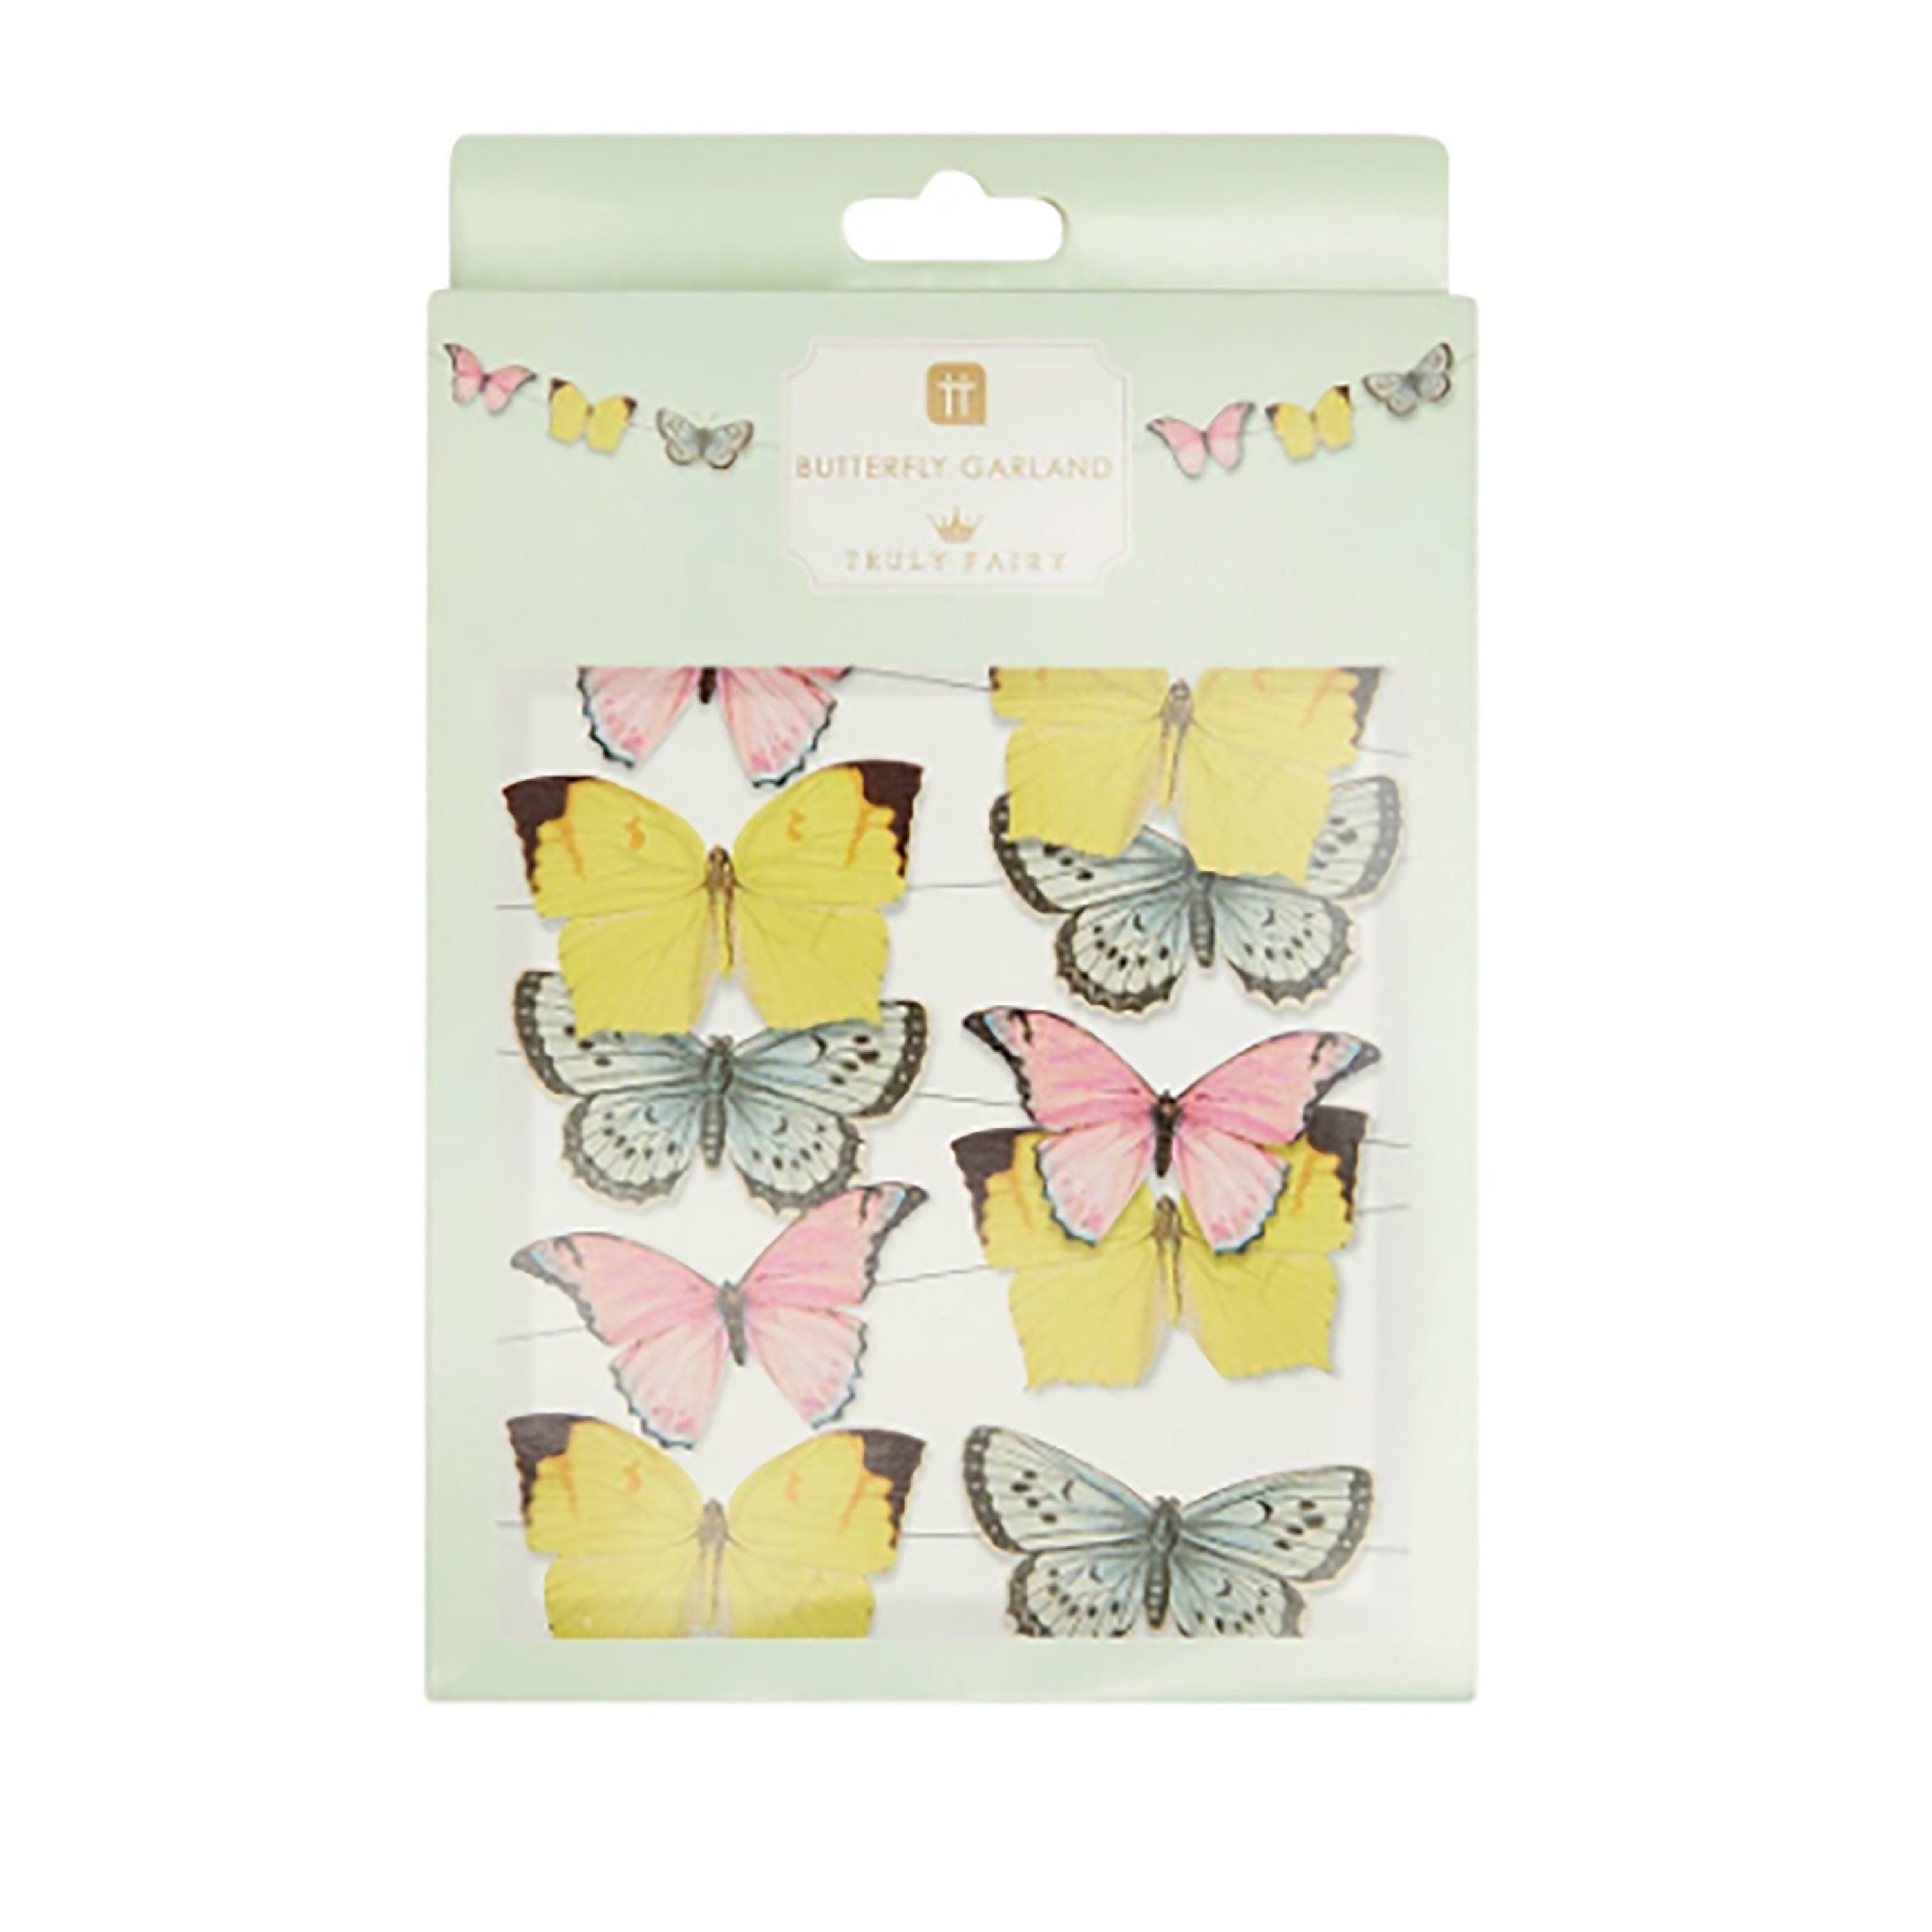 Butterfly Garland | Butterfly Party Decorations - Butterfly Birthday Party - Fairy Birthday Party - Fairy Party - Tea Party Birthday - Small